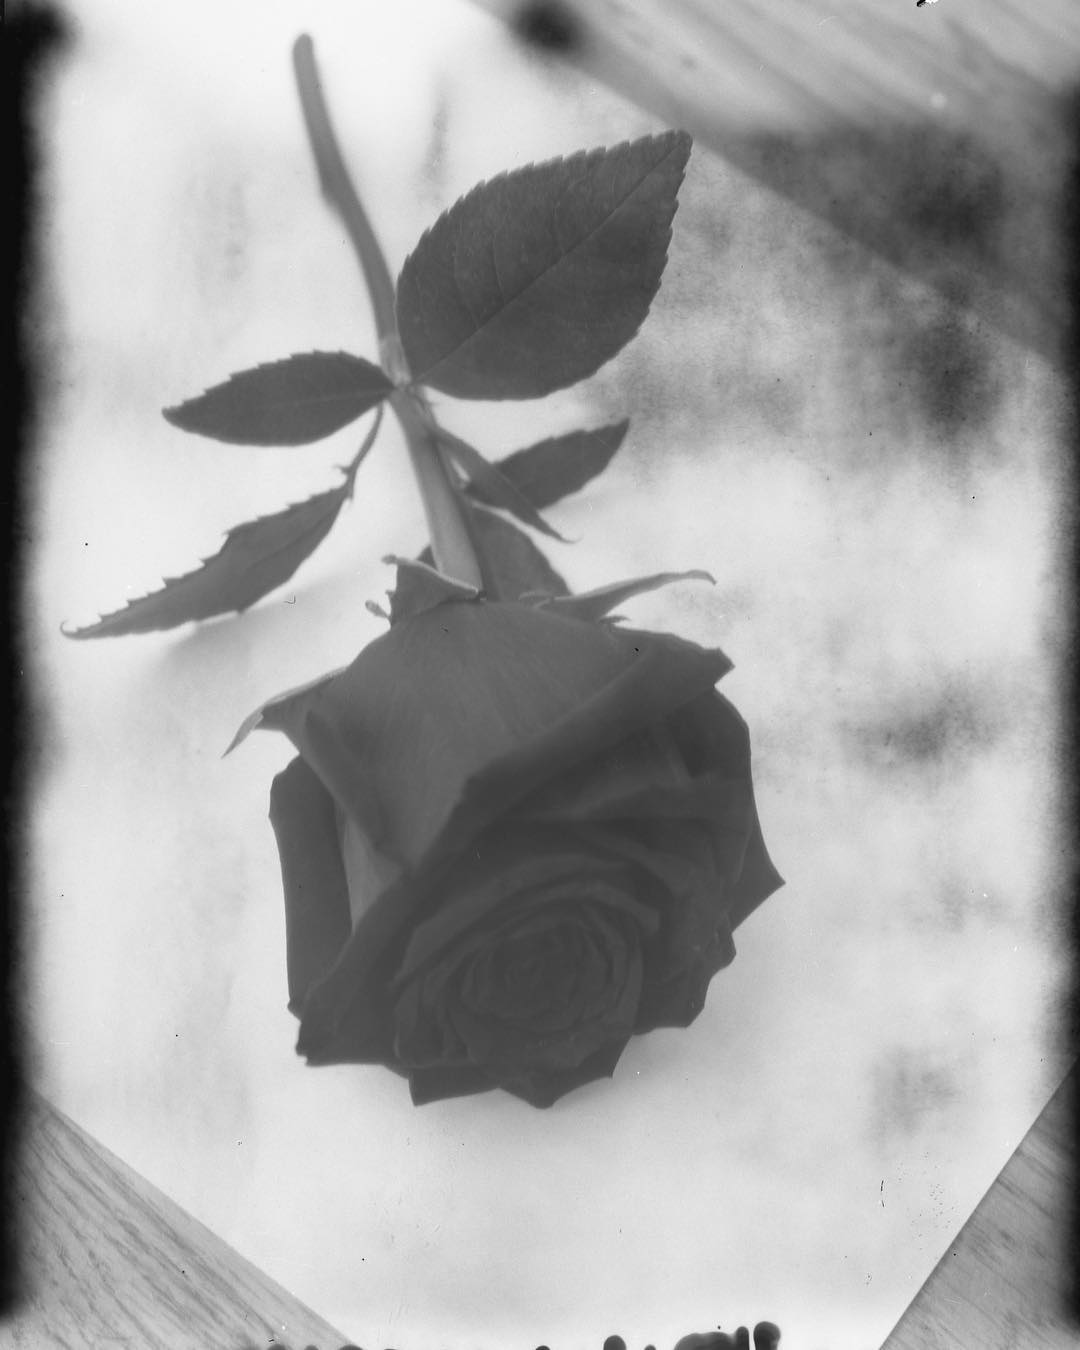 Rose. Shot with my Speed Graphic on New55 film in natural light, f/16 at 4 seconds, during a workshop at Penumbra Foundation yesterday with New55 CEO @swhiser. This rose was part of an arrangement on my mother-in-law's casket at her funeral on Thursday. This photo is in honor of her. #new55 #new55film #new55pn #largeformat #polaroidish #film #filmphotography #filmisnotdead #ishootfilm #penumbra #penumbraworkshop